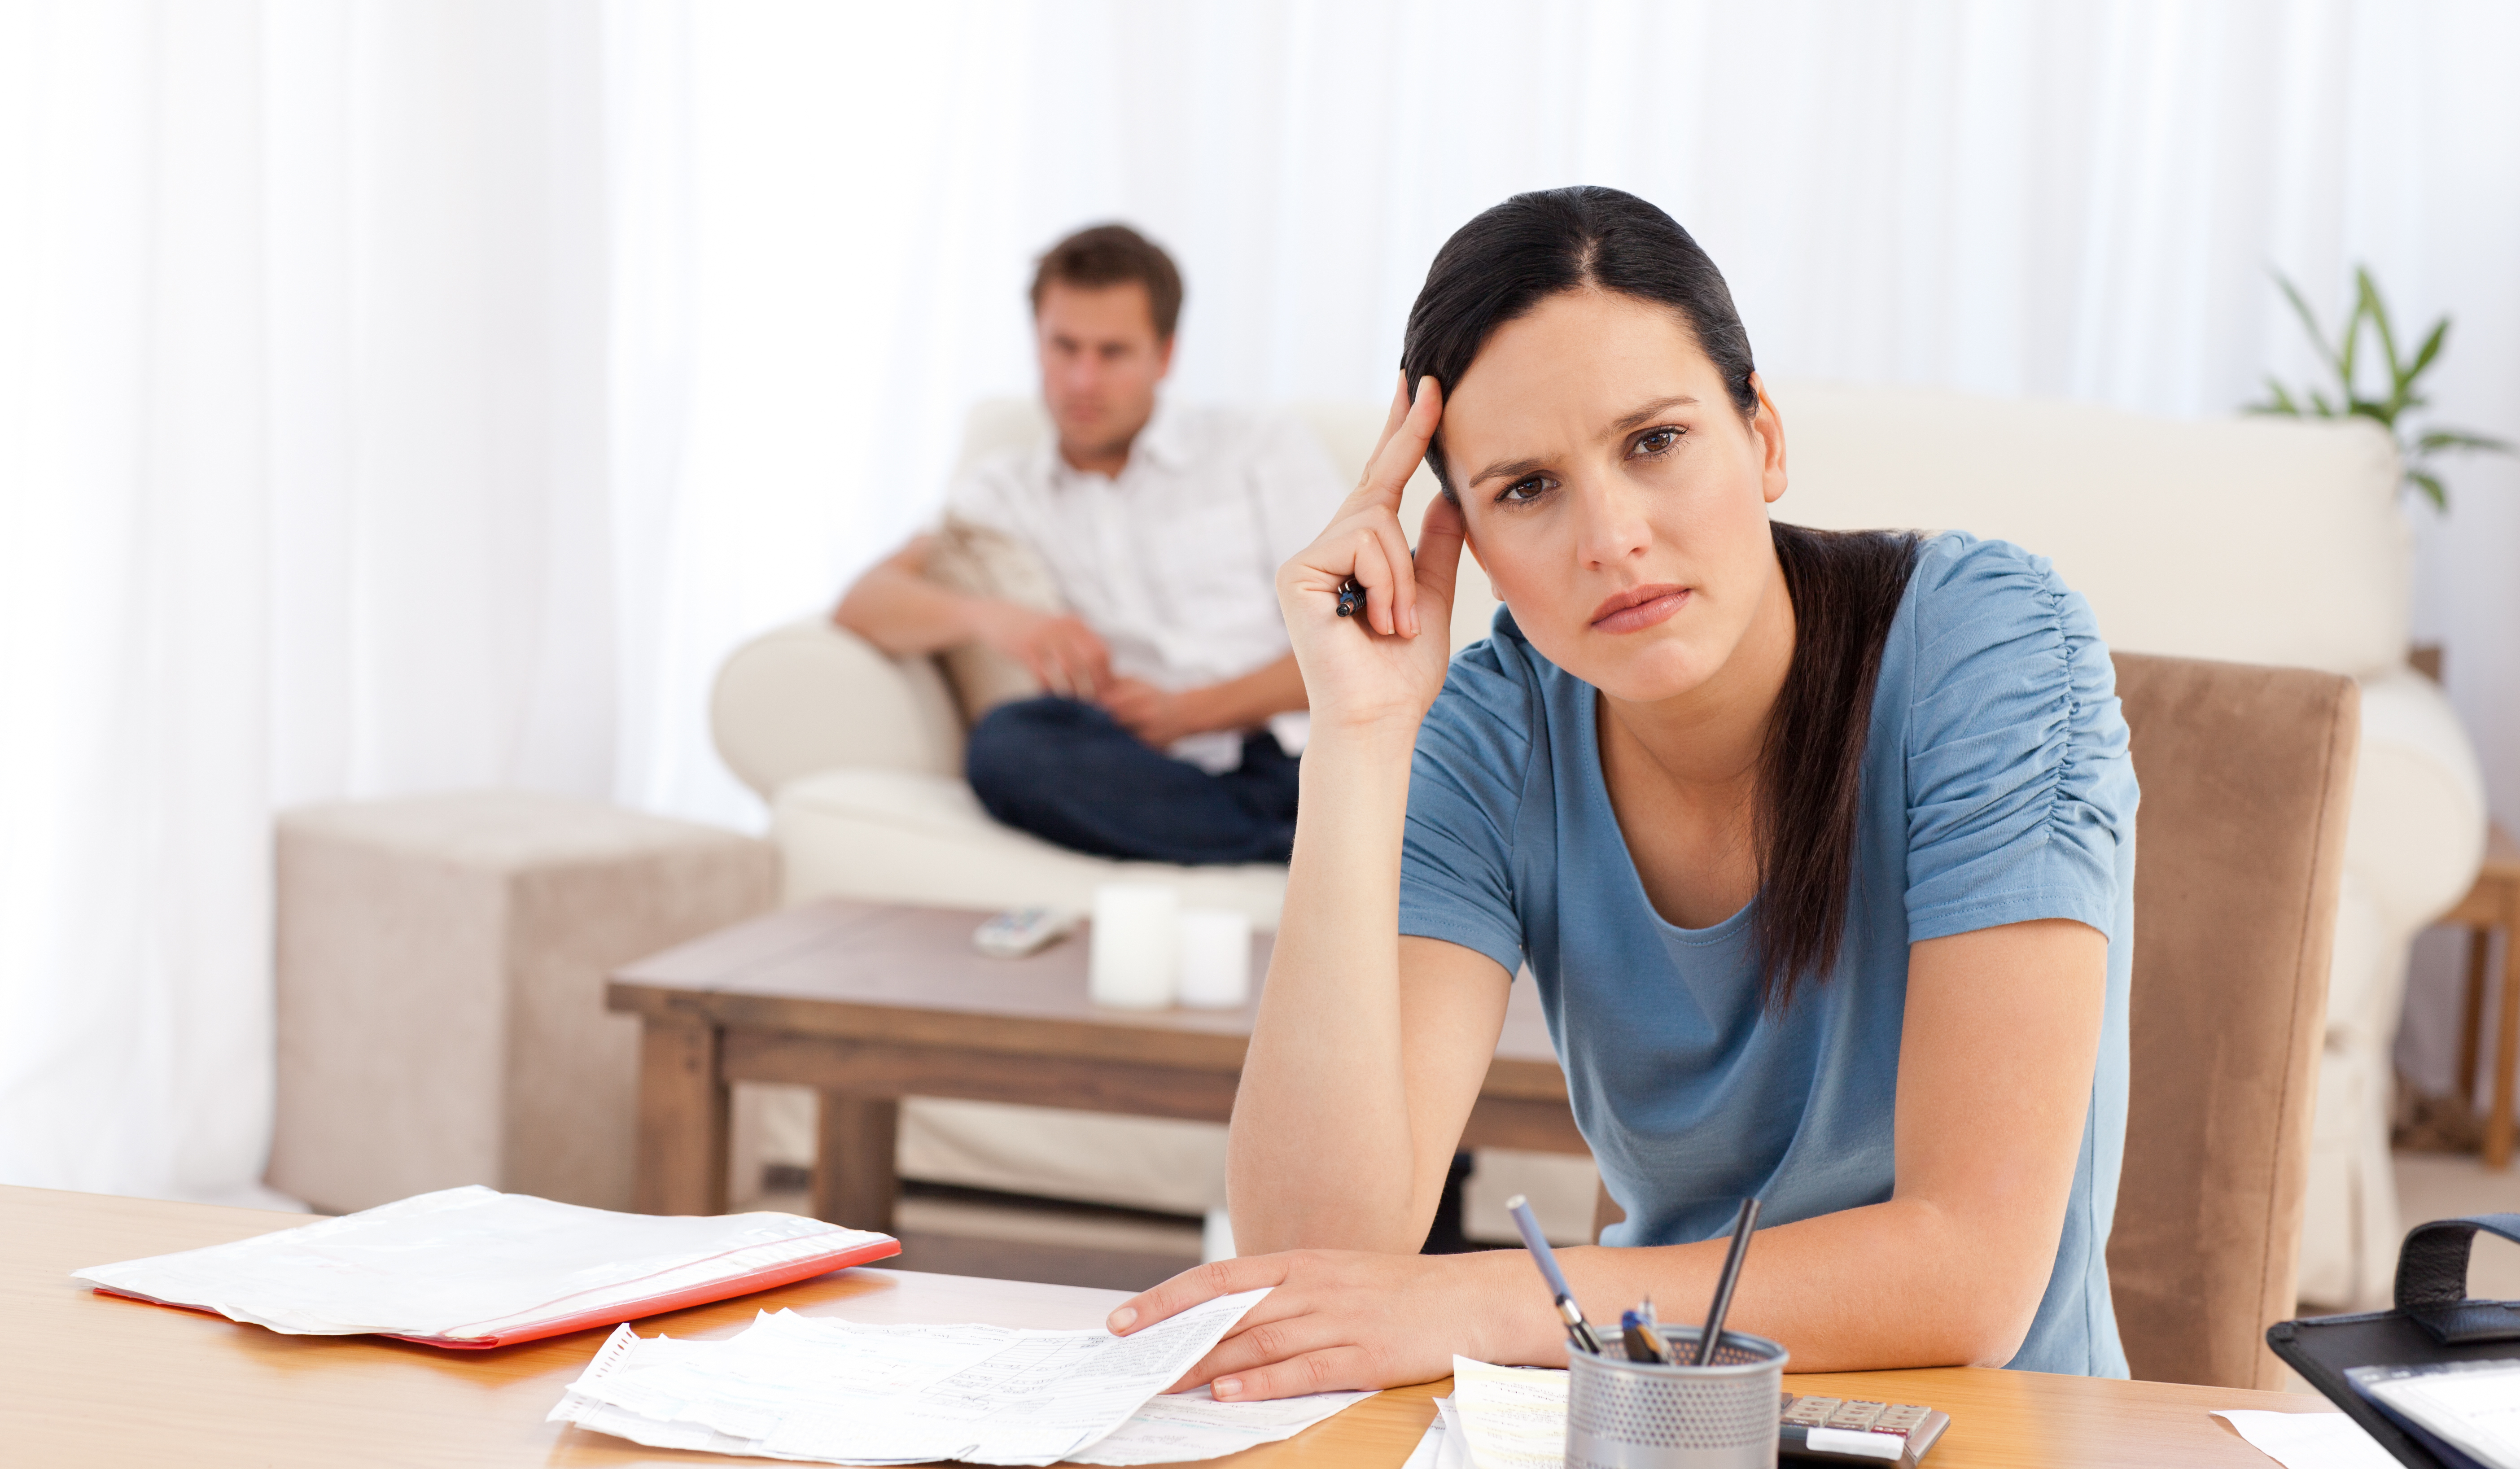 Divorce Financial Expert helps to navigate the financial aspects of divorce